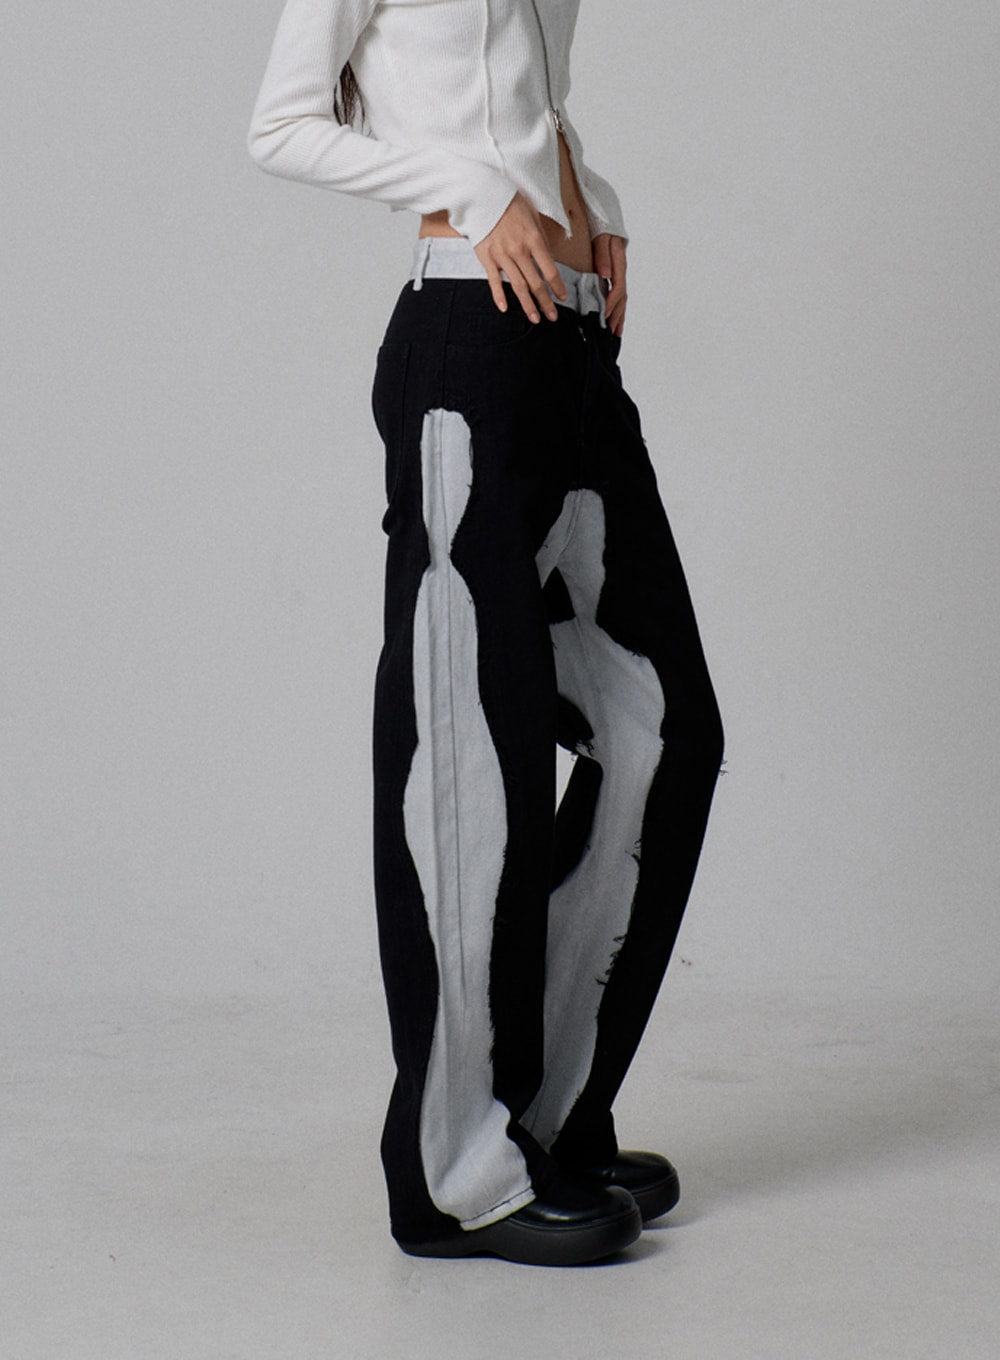 Black And White Two-Tone Pants  Black and white jeans, Two toned